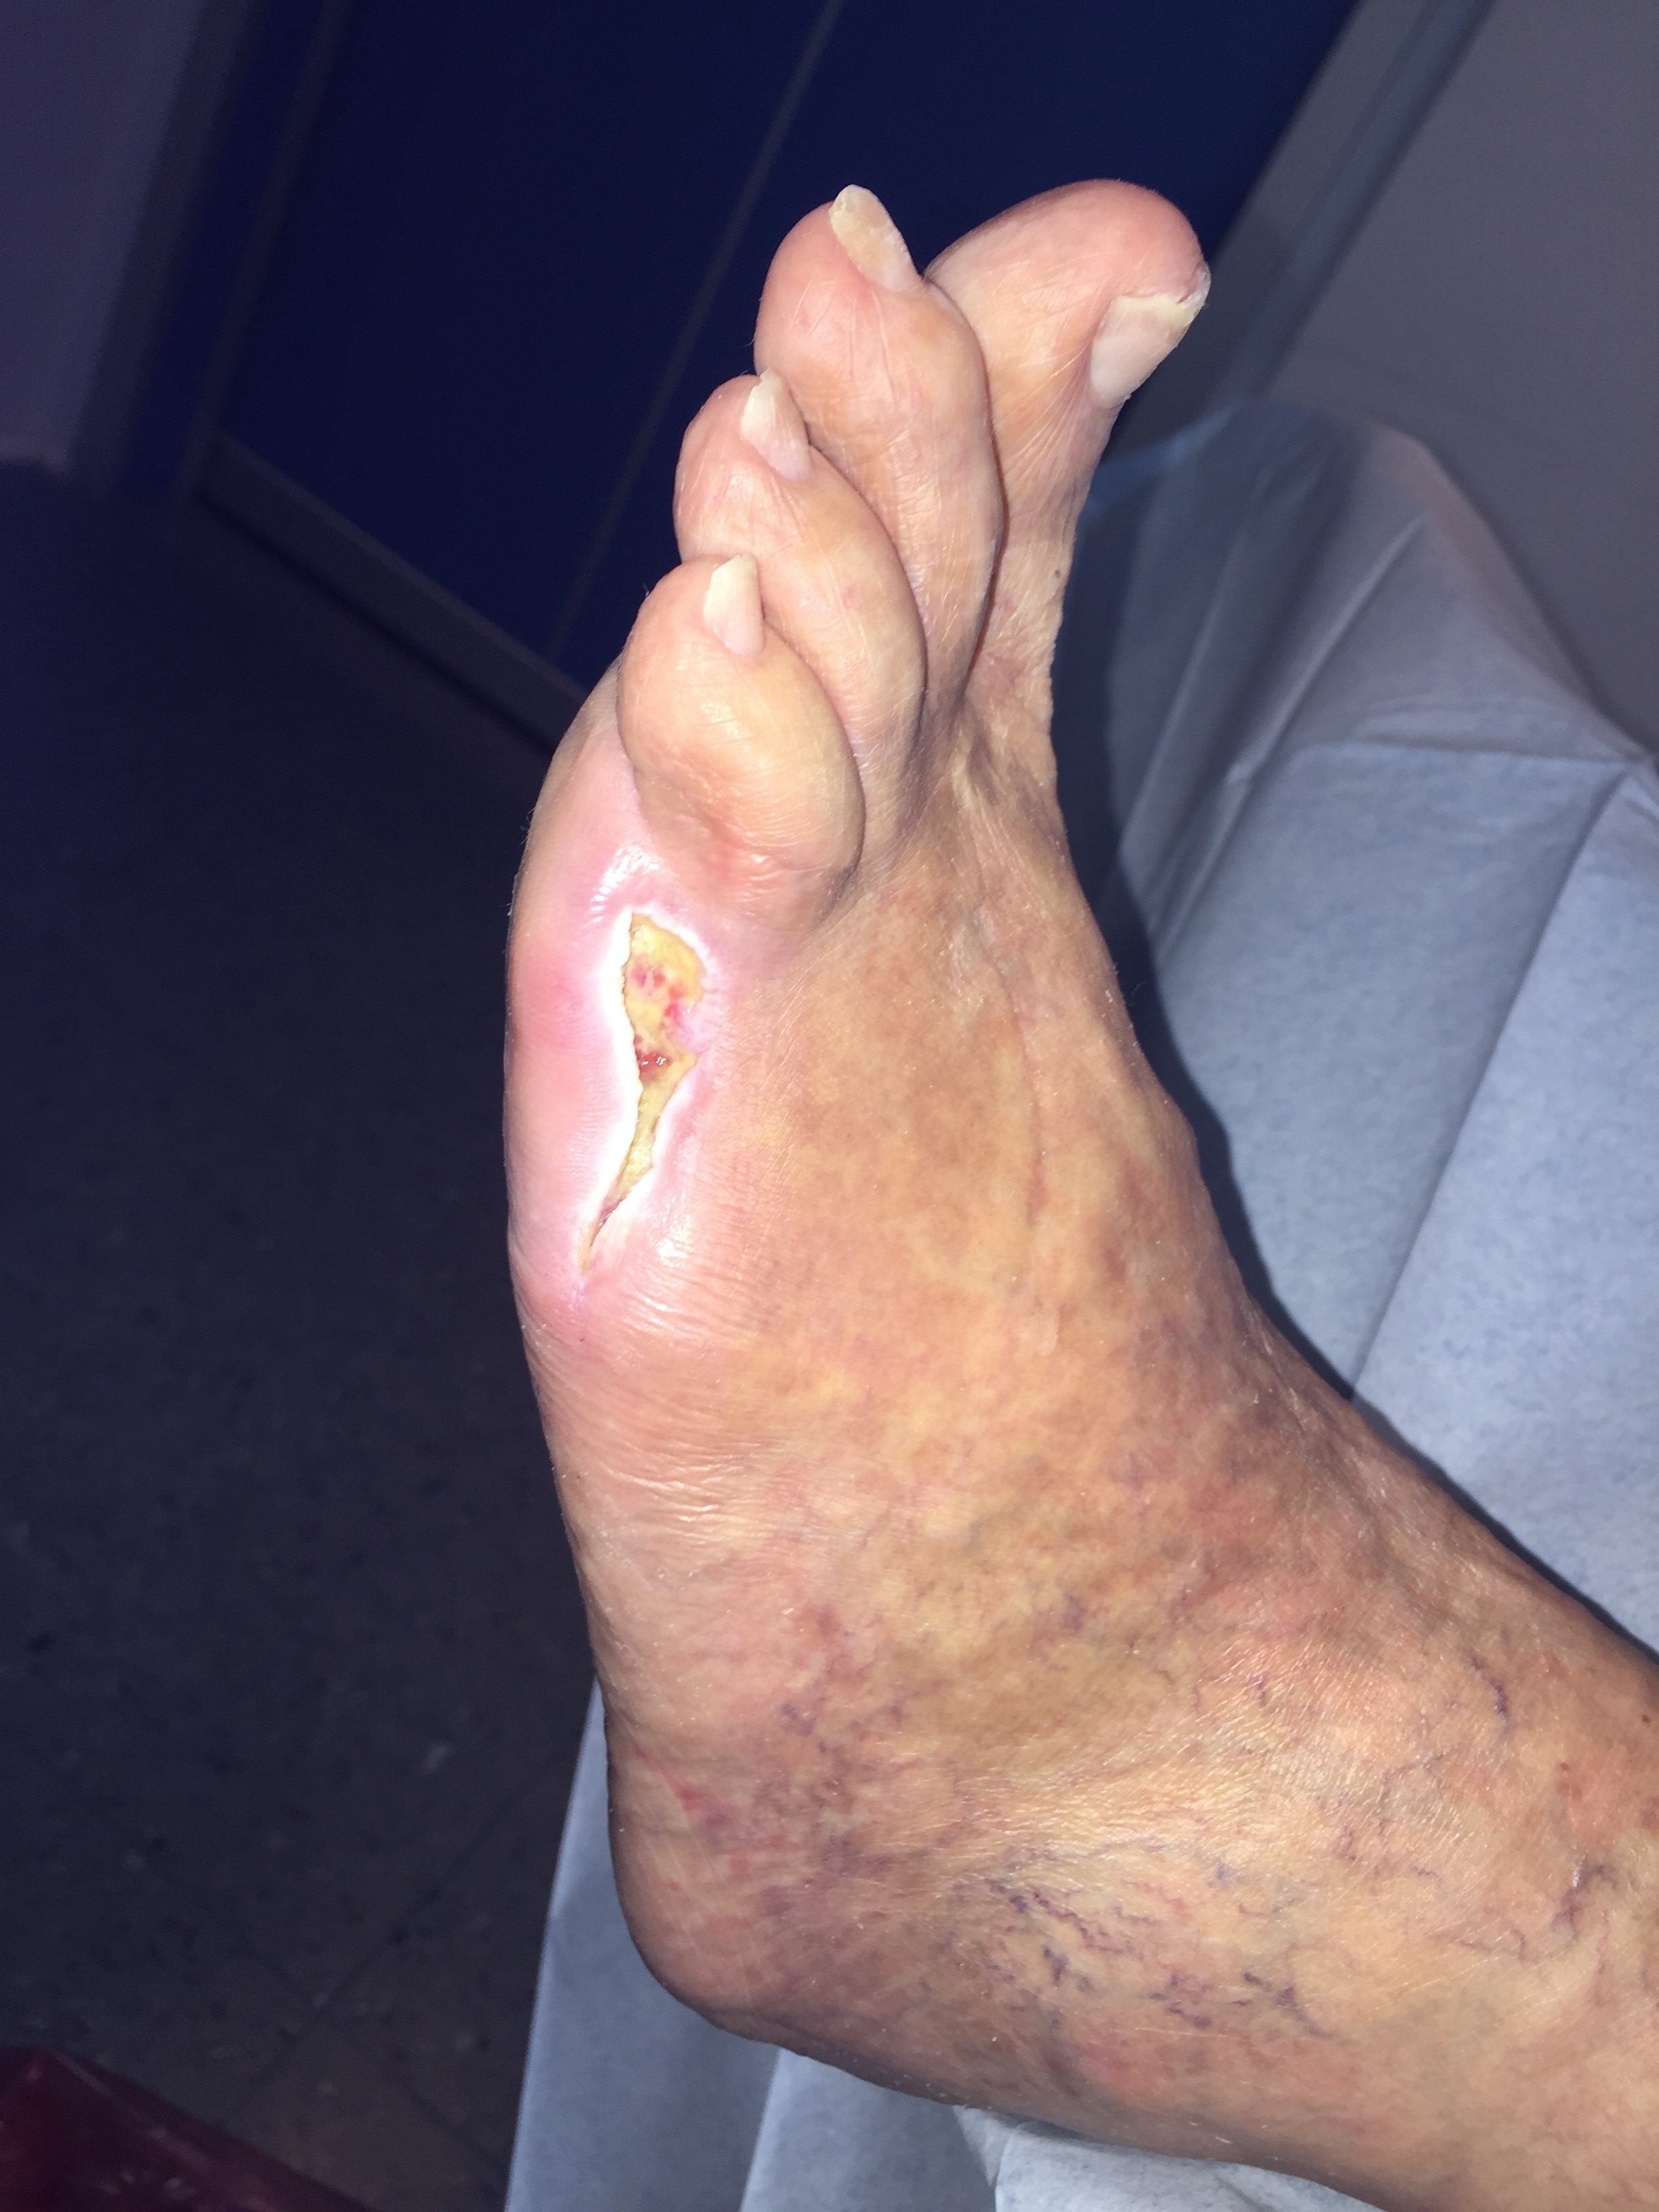 Treatment of a mildly infected diabetic foot ulcer on the toe